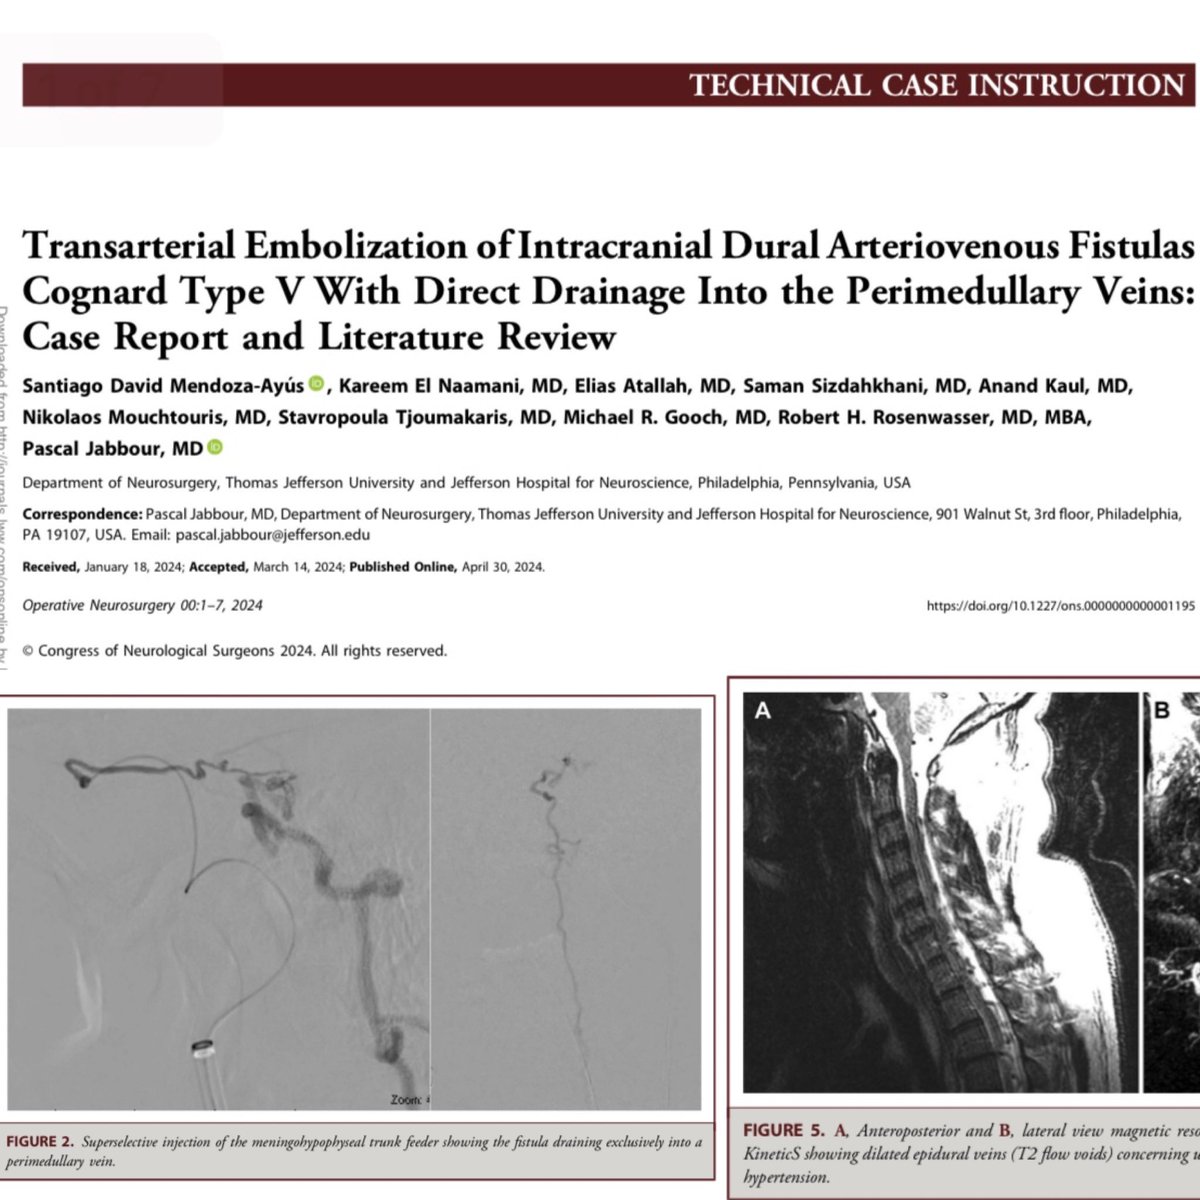 Cognard V DAVFs are rare lesions, clinical presentation can be tricky ! Hot off the press nicely executed by a superstar visiting med student @santimendozayus from Universidad Del Rosario Bogota Colombia @TJUHNeurosurg @JeffersonUniv @TJUHospital